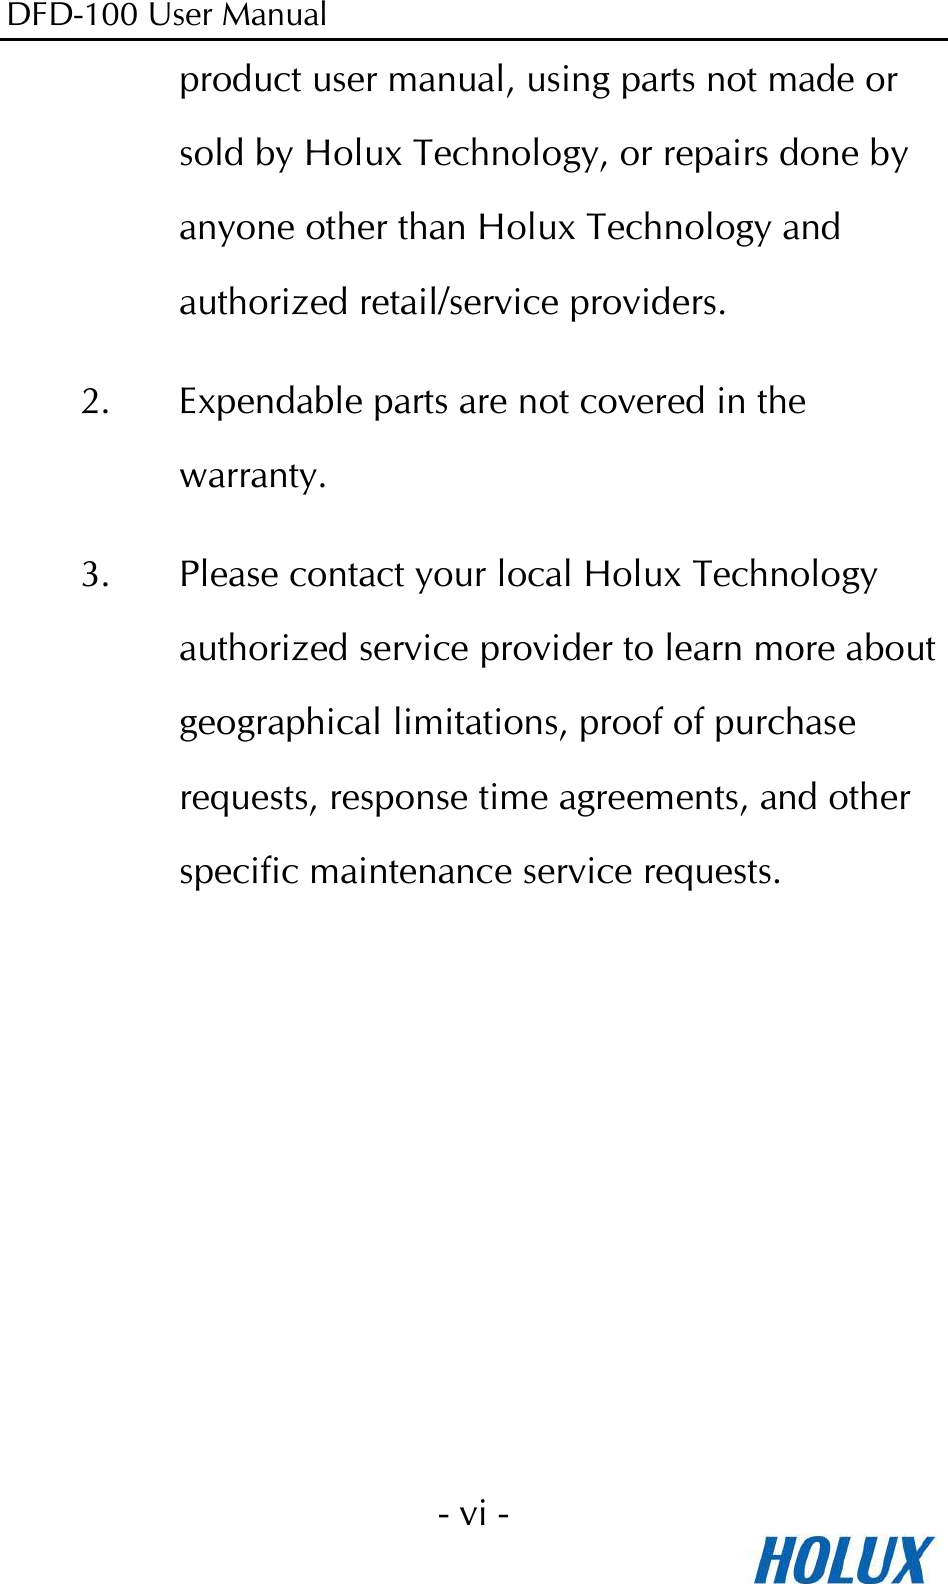 DFD-100 User Manual - vi -  product user manual, using parts not made or sold by Holux Technology, or repairs done by anyone other than Holux Technology and authorized retail/service providers. 2. Expendable parts are not covered in the warranty. 3. Please contact your local Holux Technology authorized service provider to learn more about geographical limitations, proof of purchase requests, response time agreements, and other specific maintenance service requests. 